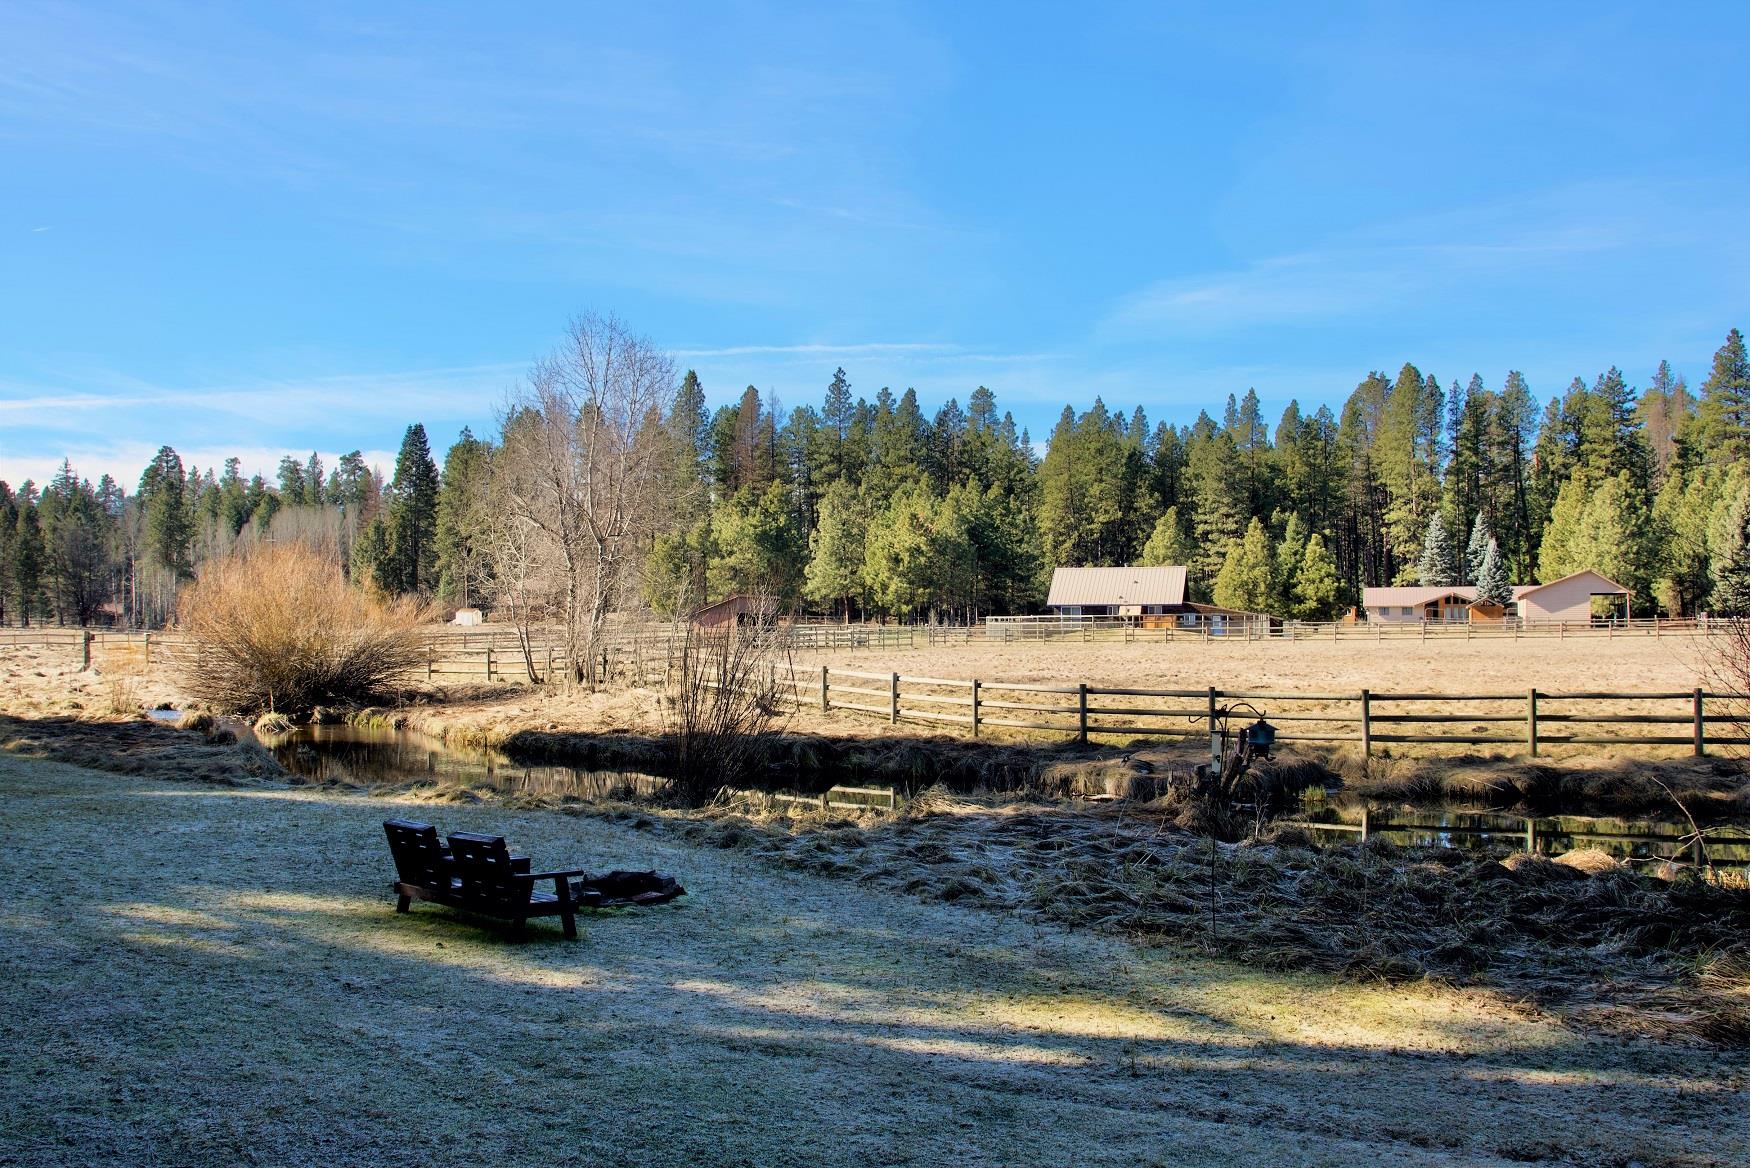 A perfect view of Cold Springs Creek, off the deck of Maple Cabin, at Cold Springs Resort in Camp Sherman, Oregon